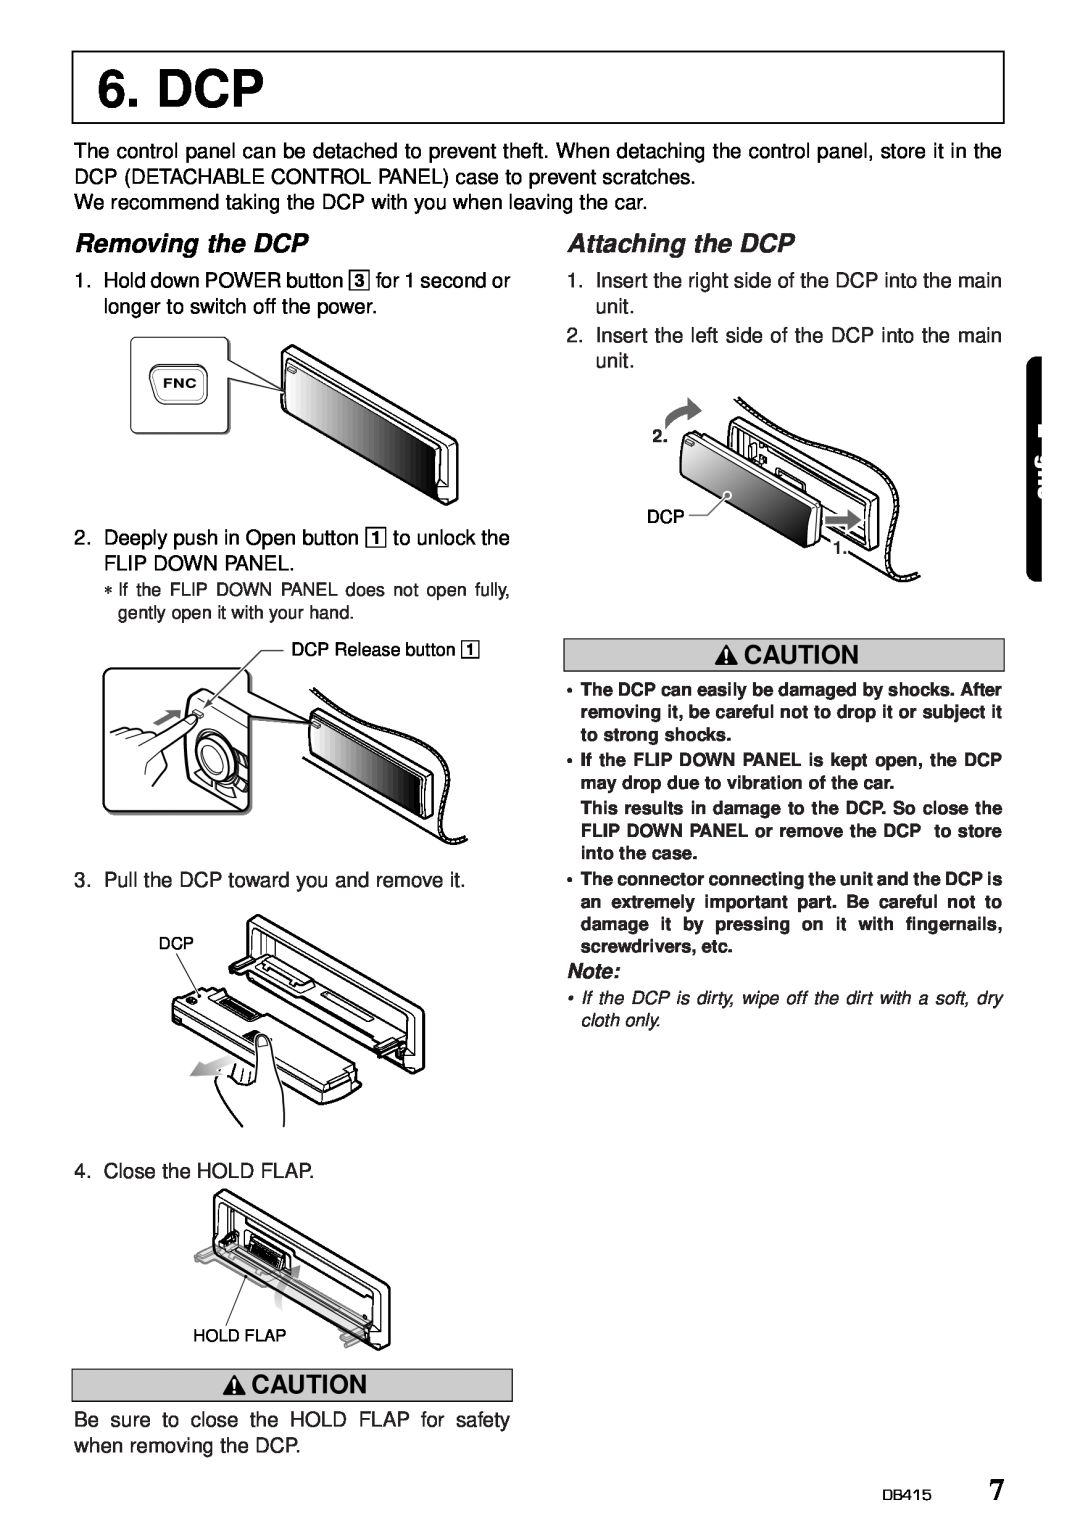 Clarion DB415 owner manual Dcp, Removing the DCP, Attaching the DCP 